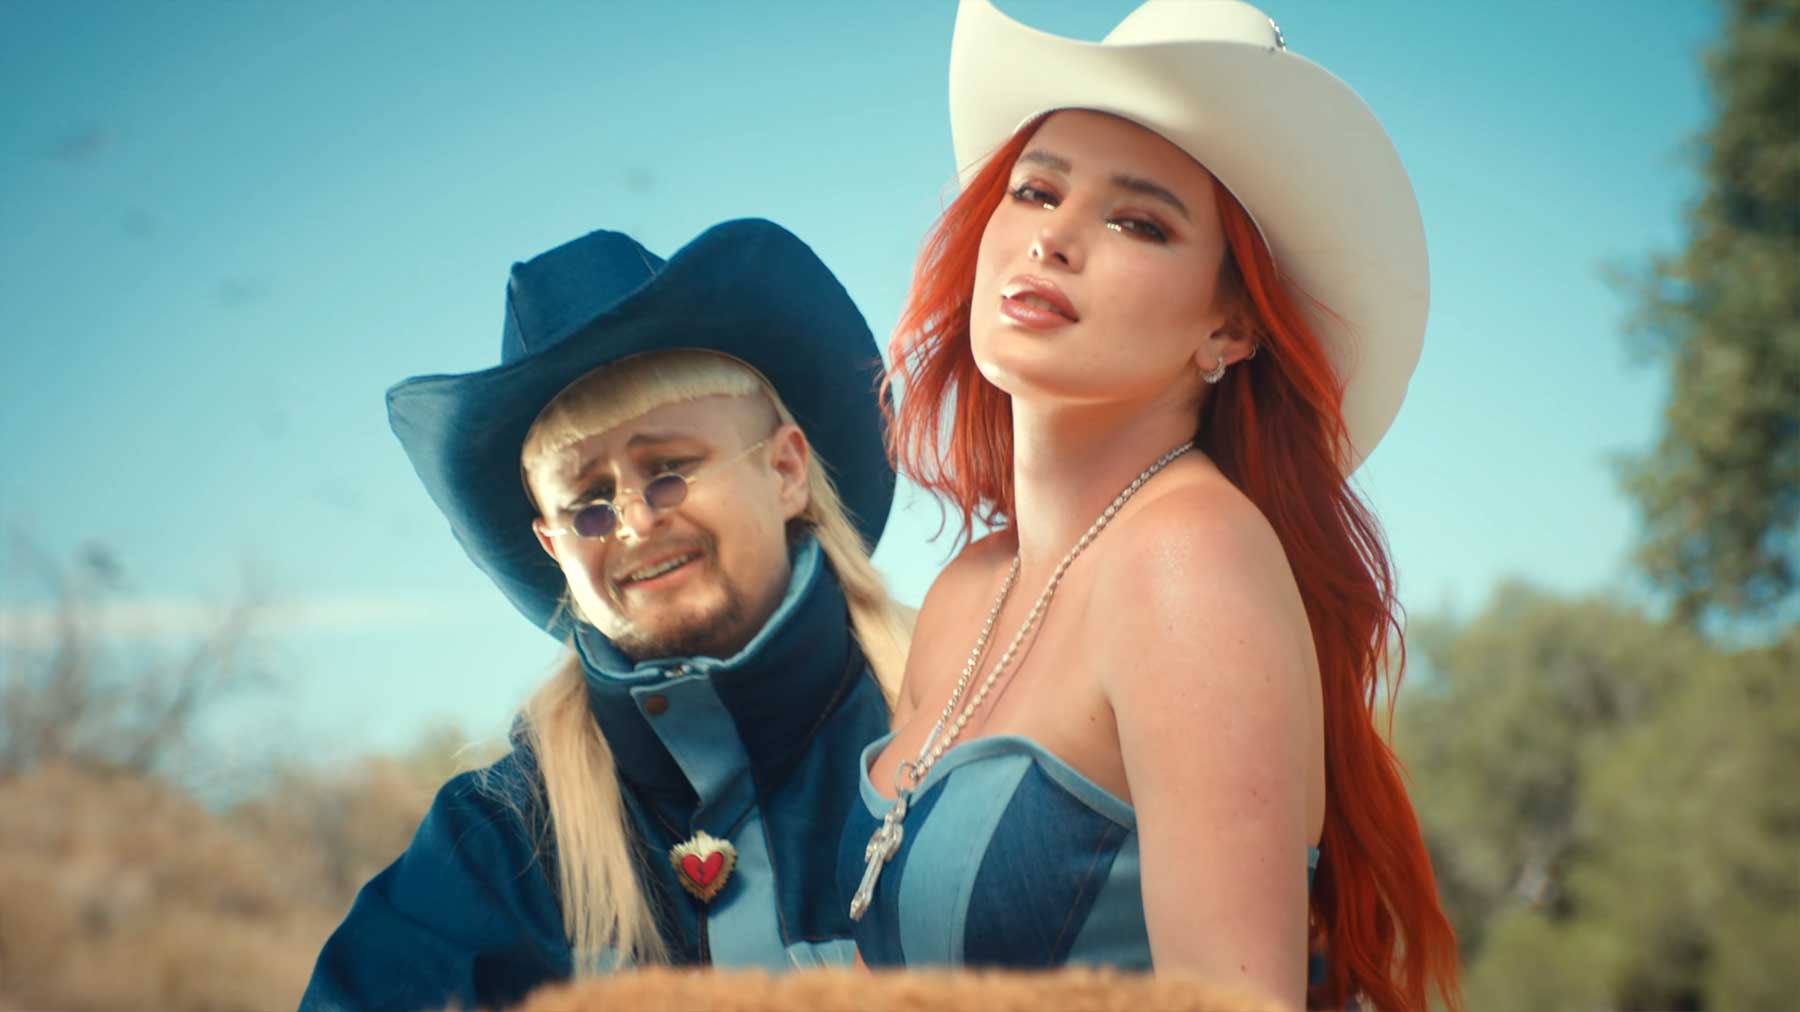 Musikvideo: Oliver Tree - "Cowboys Don't Cry" Oliver-Tree-Cowboys-dont-cry-musikvideo 